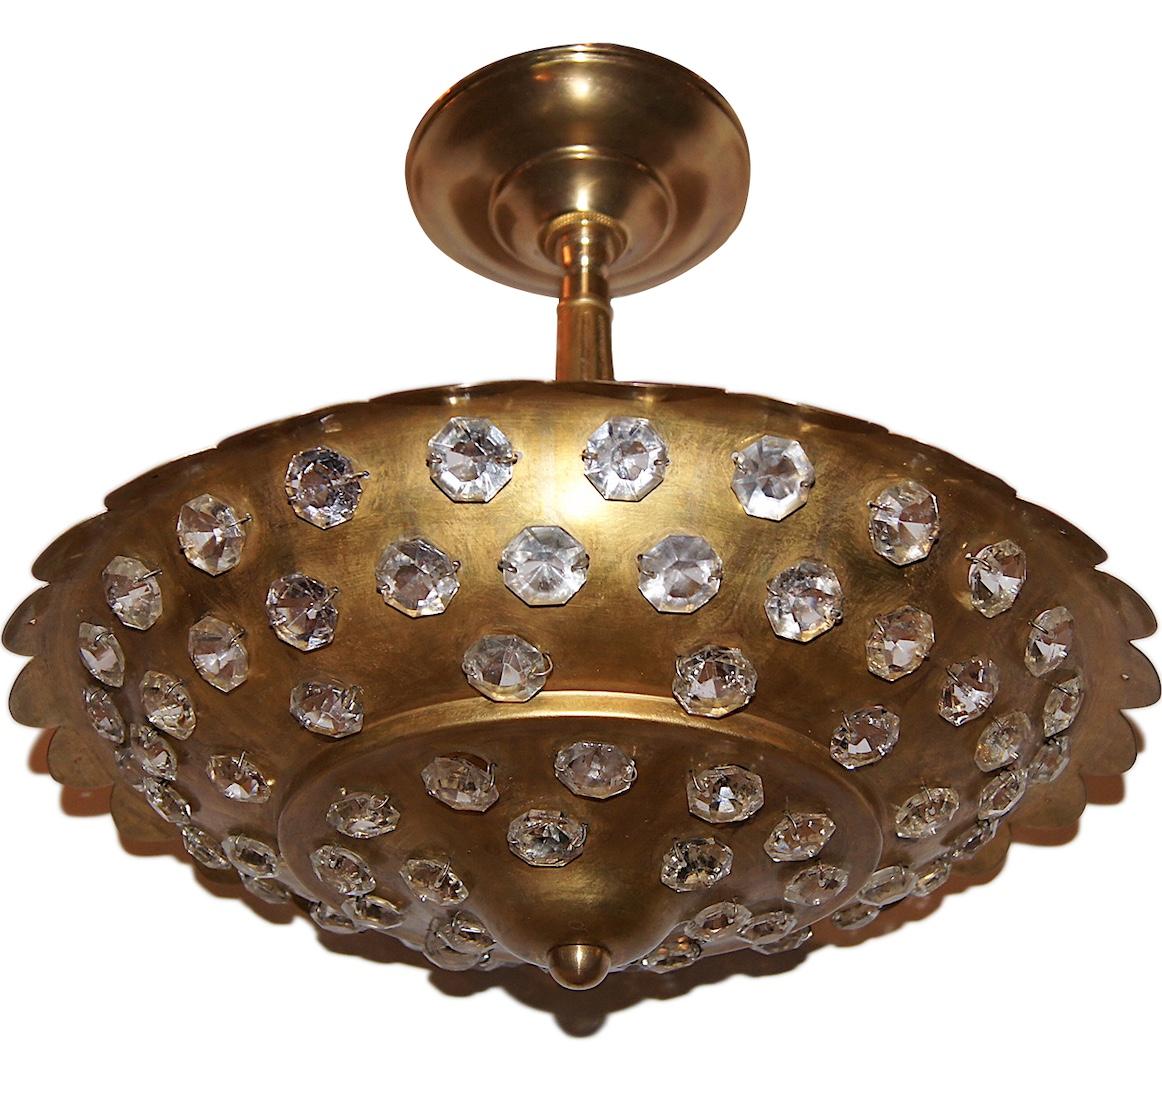 A circa 1930s French gilt light fixture with three interior lights, crystal insets. Sold Individually.

Measurements:
Diameter 14